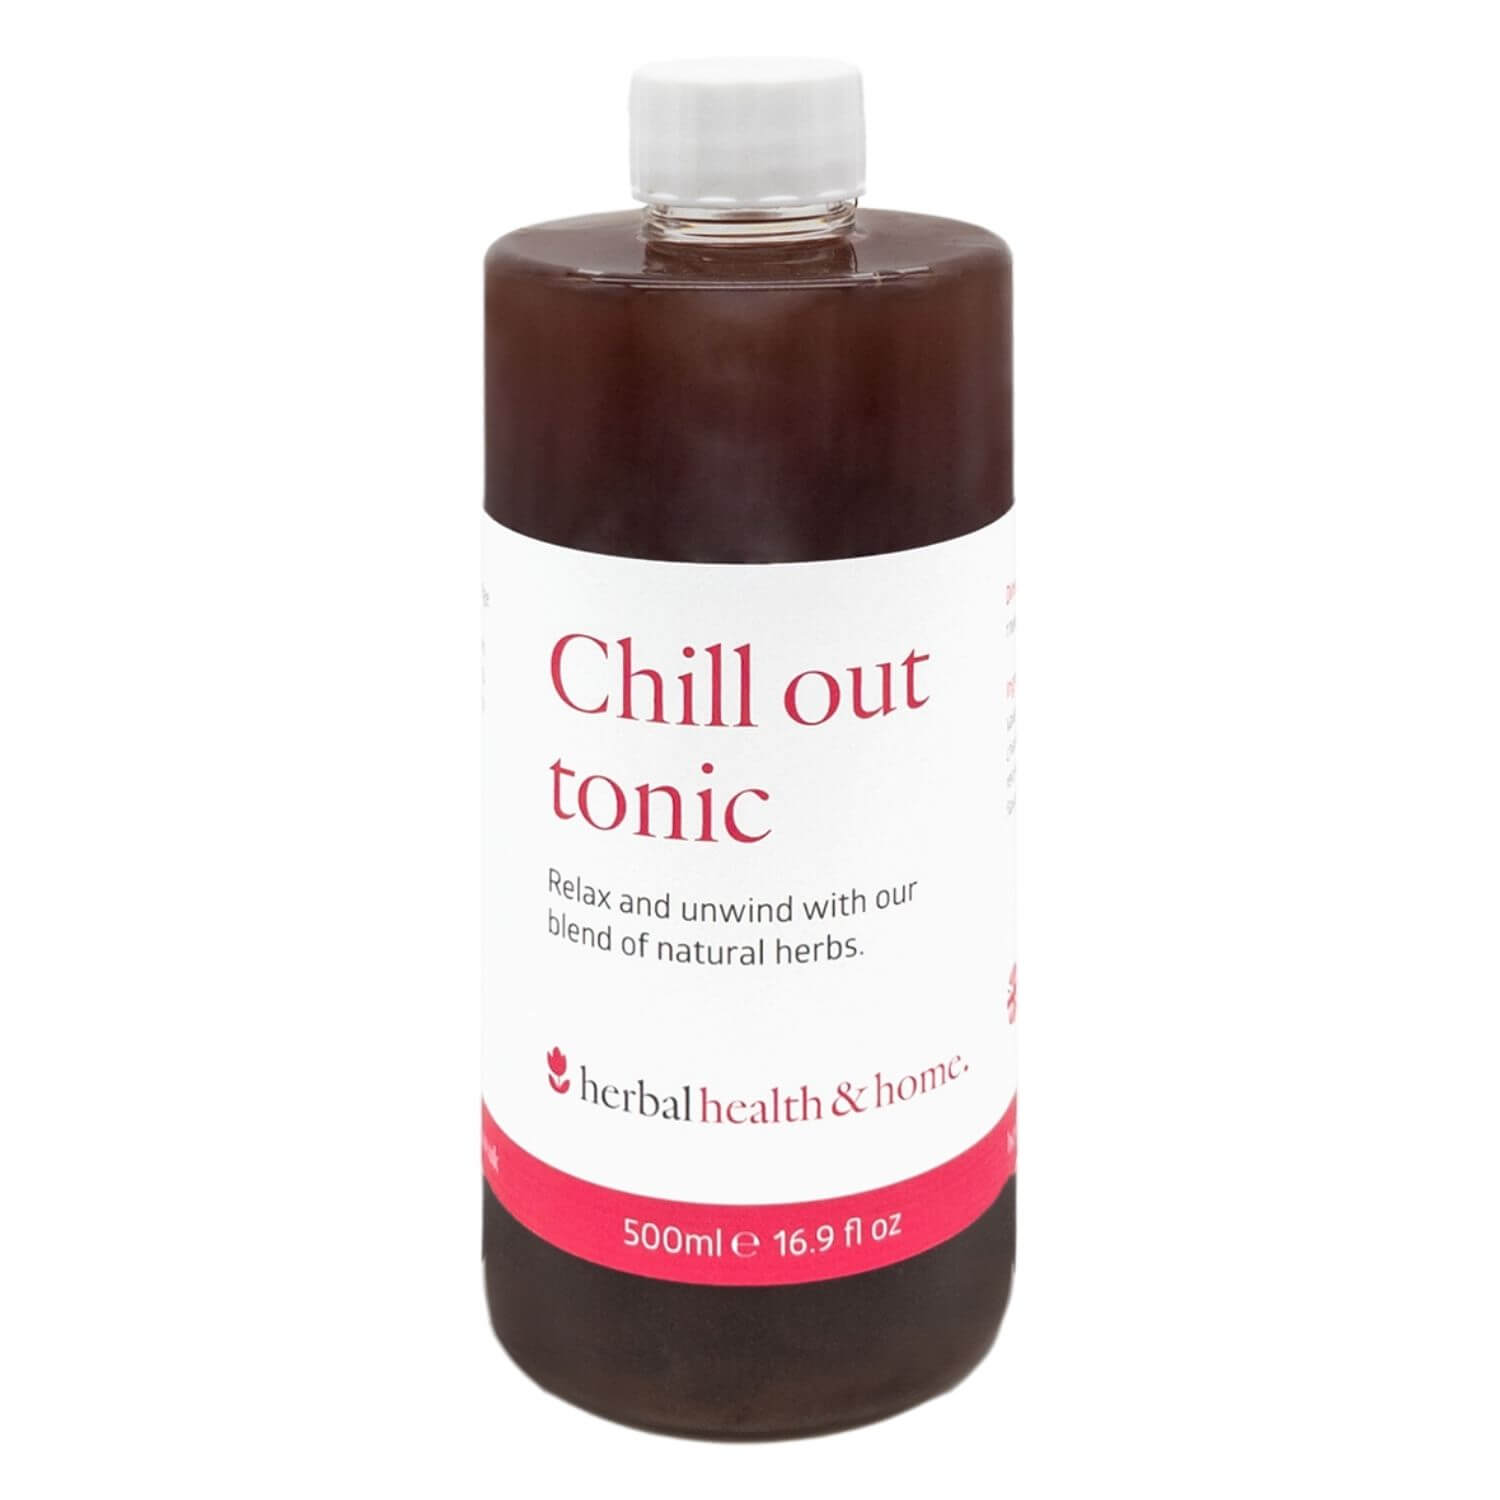 Chill Out Tonic | Herbal, Health & Home